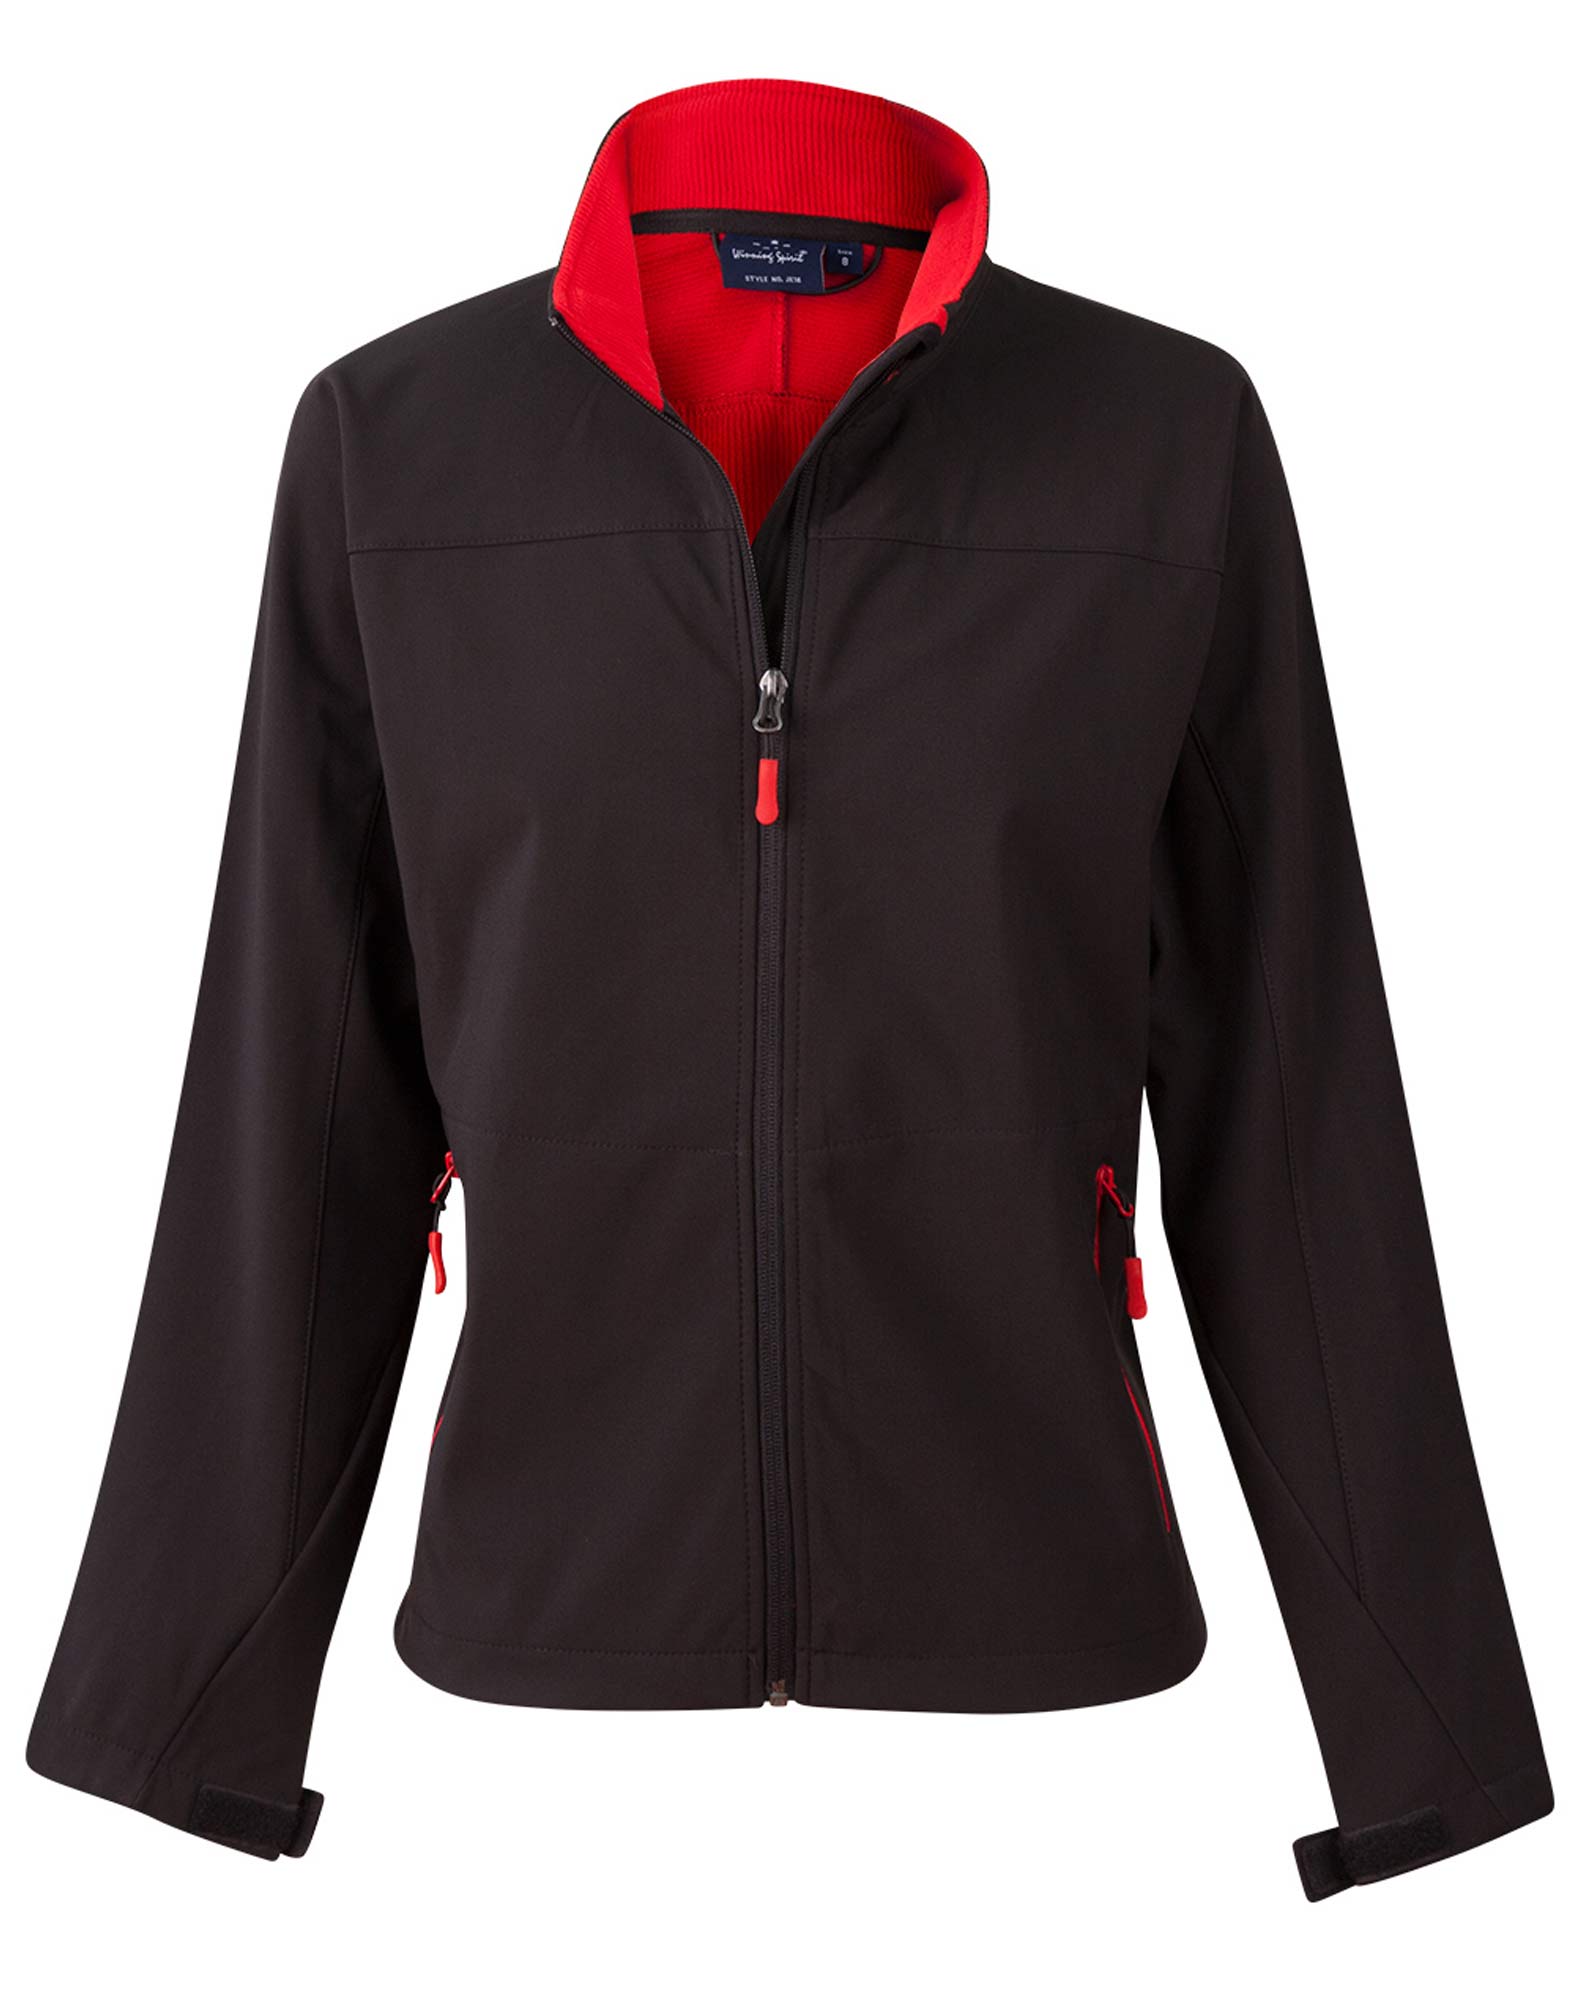 Ladies Rosewall Soft Shell Jkt - made by AIW